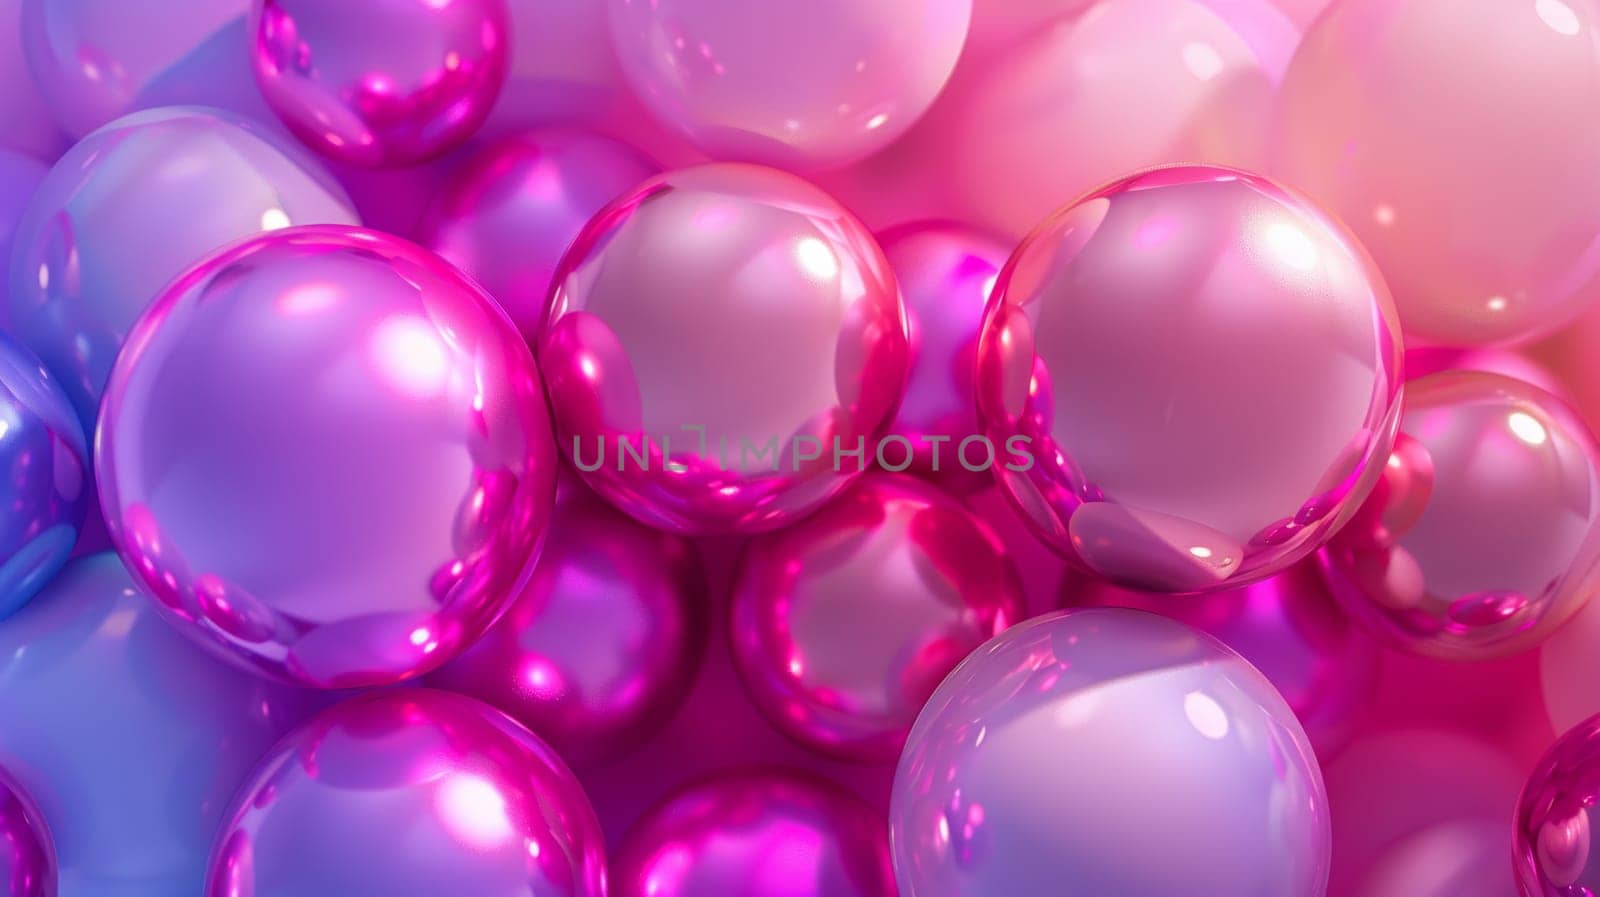 Pink and blue glossy spheres